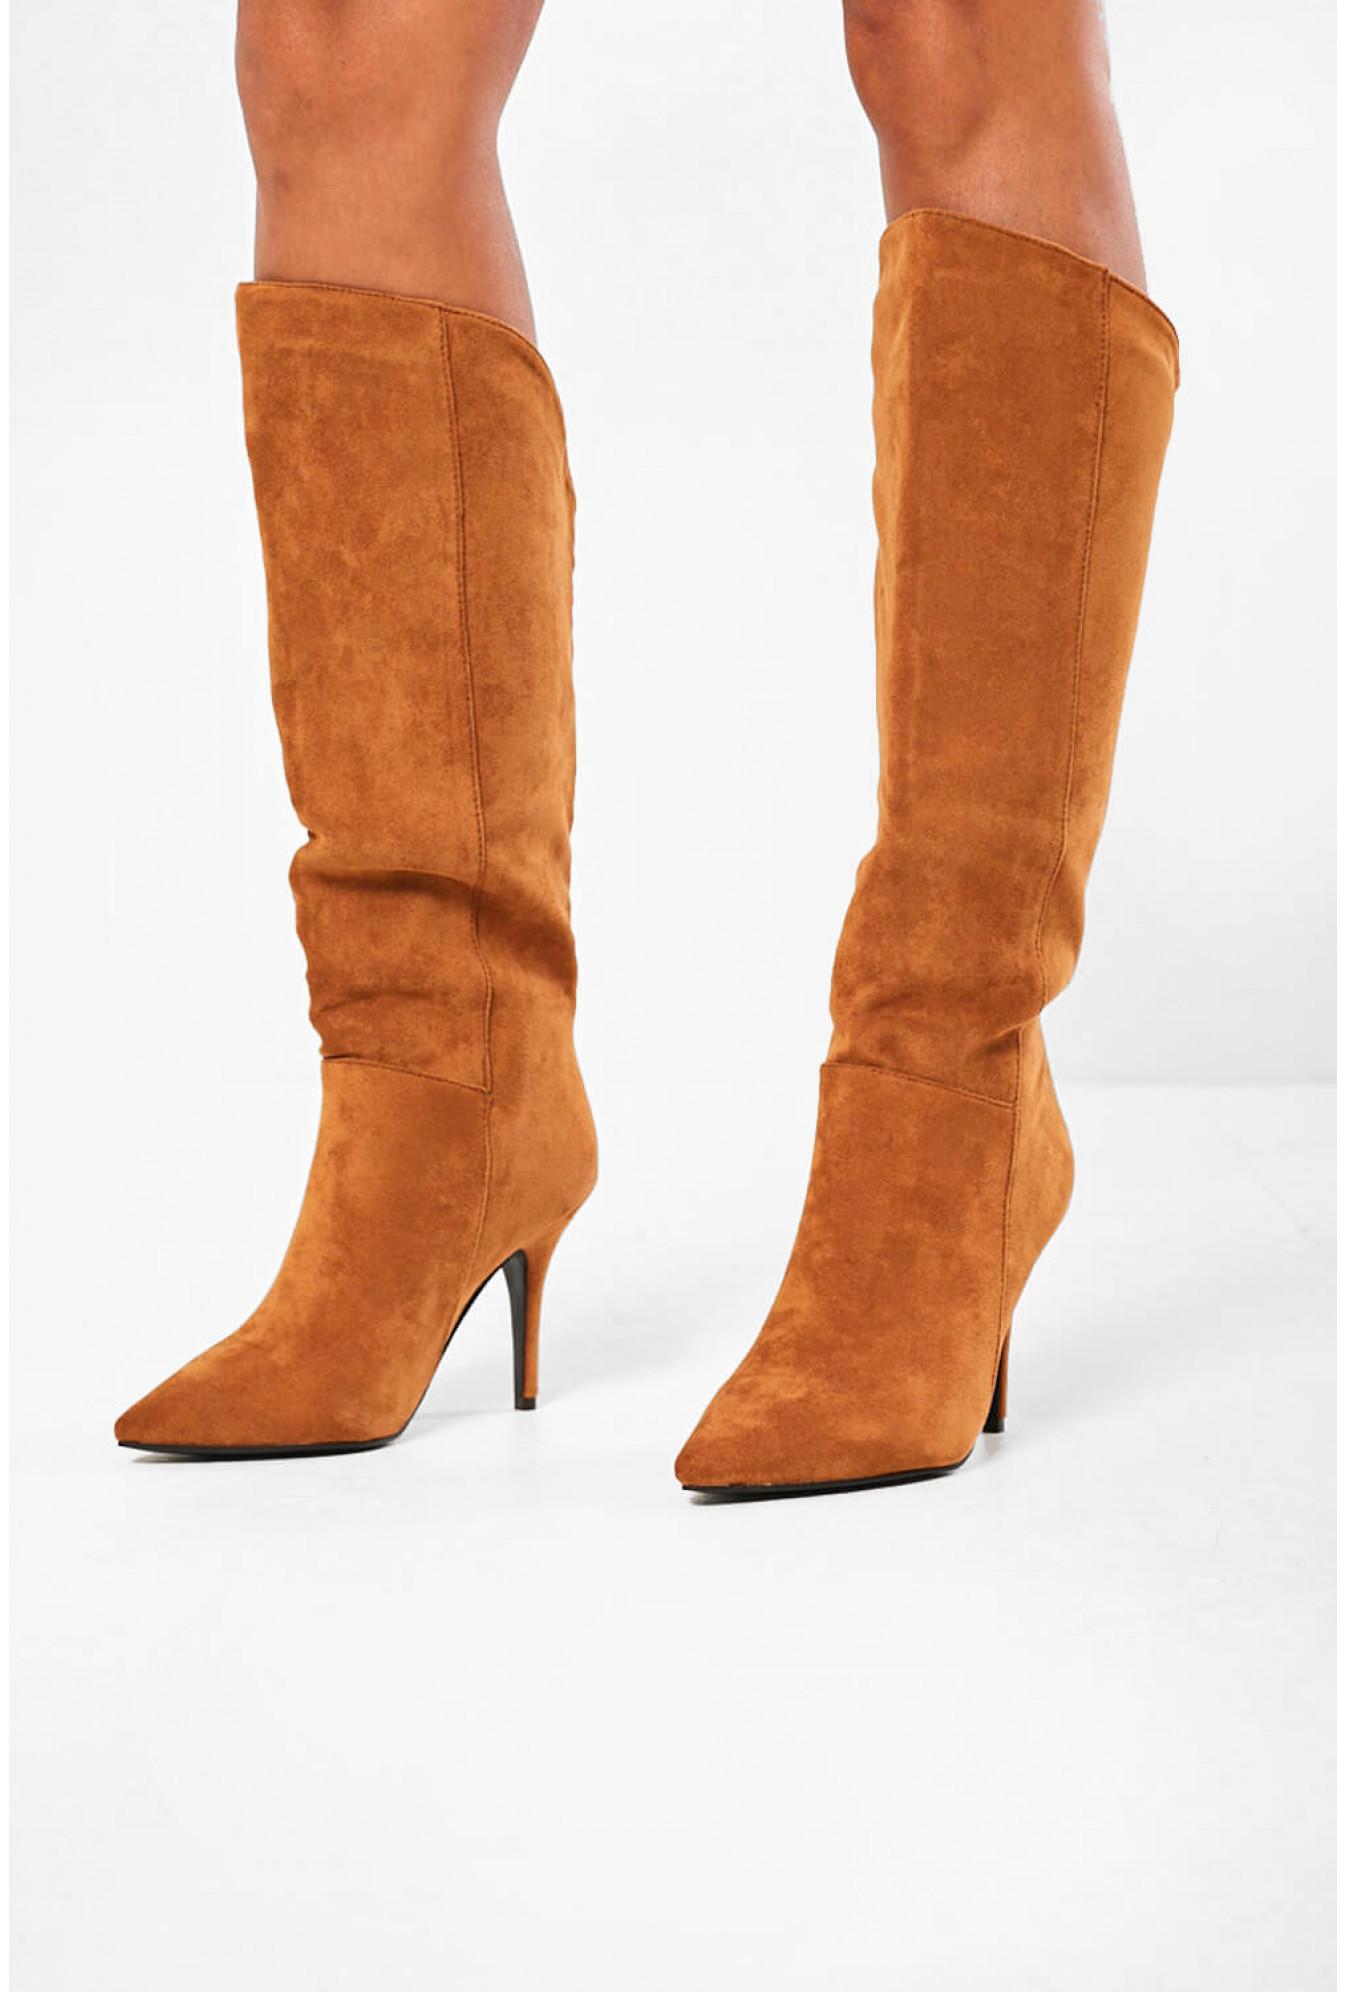 camel suede knee high boots